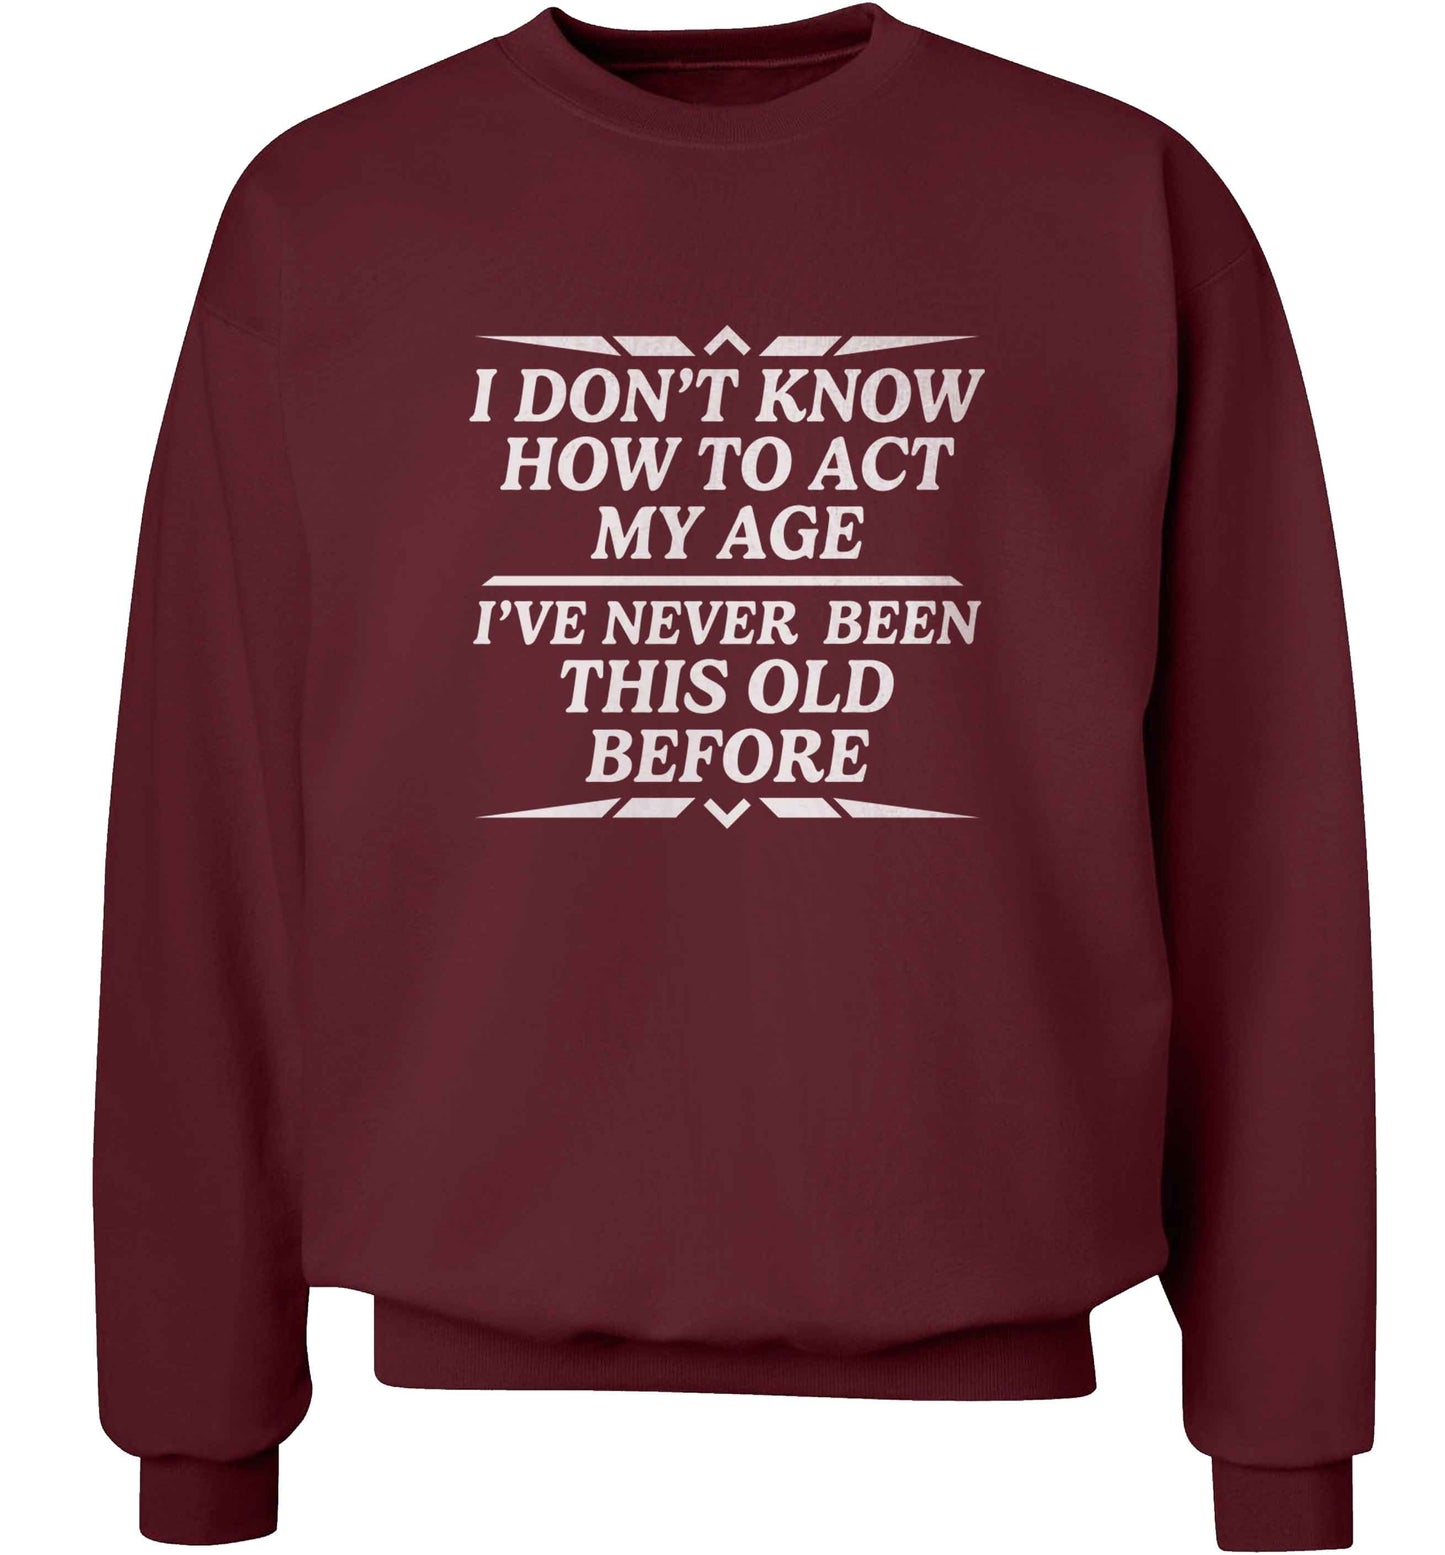 I don't know how to act my age I've never been this old before adult's unisex maroon sweater 2XL